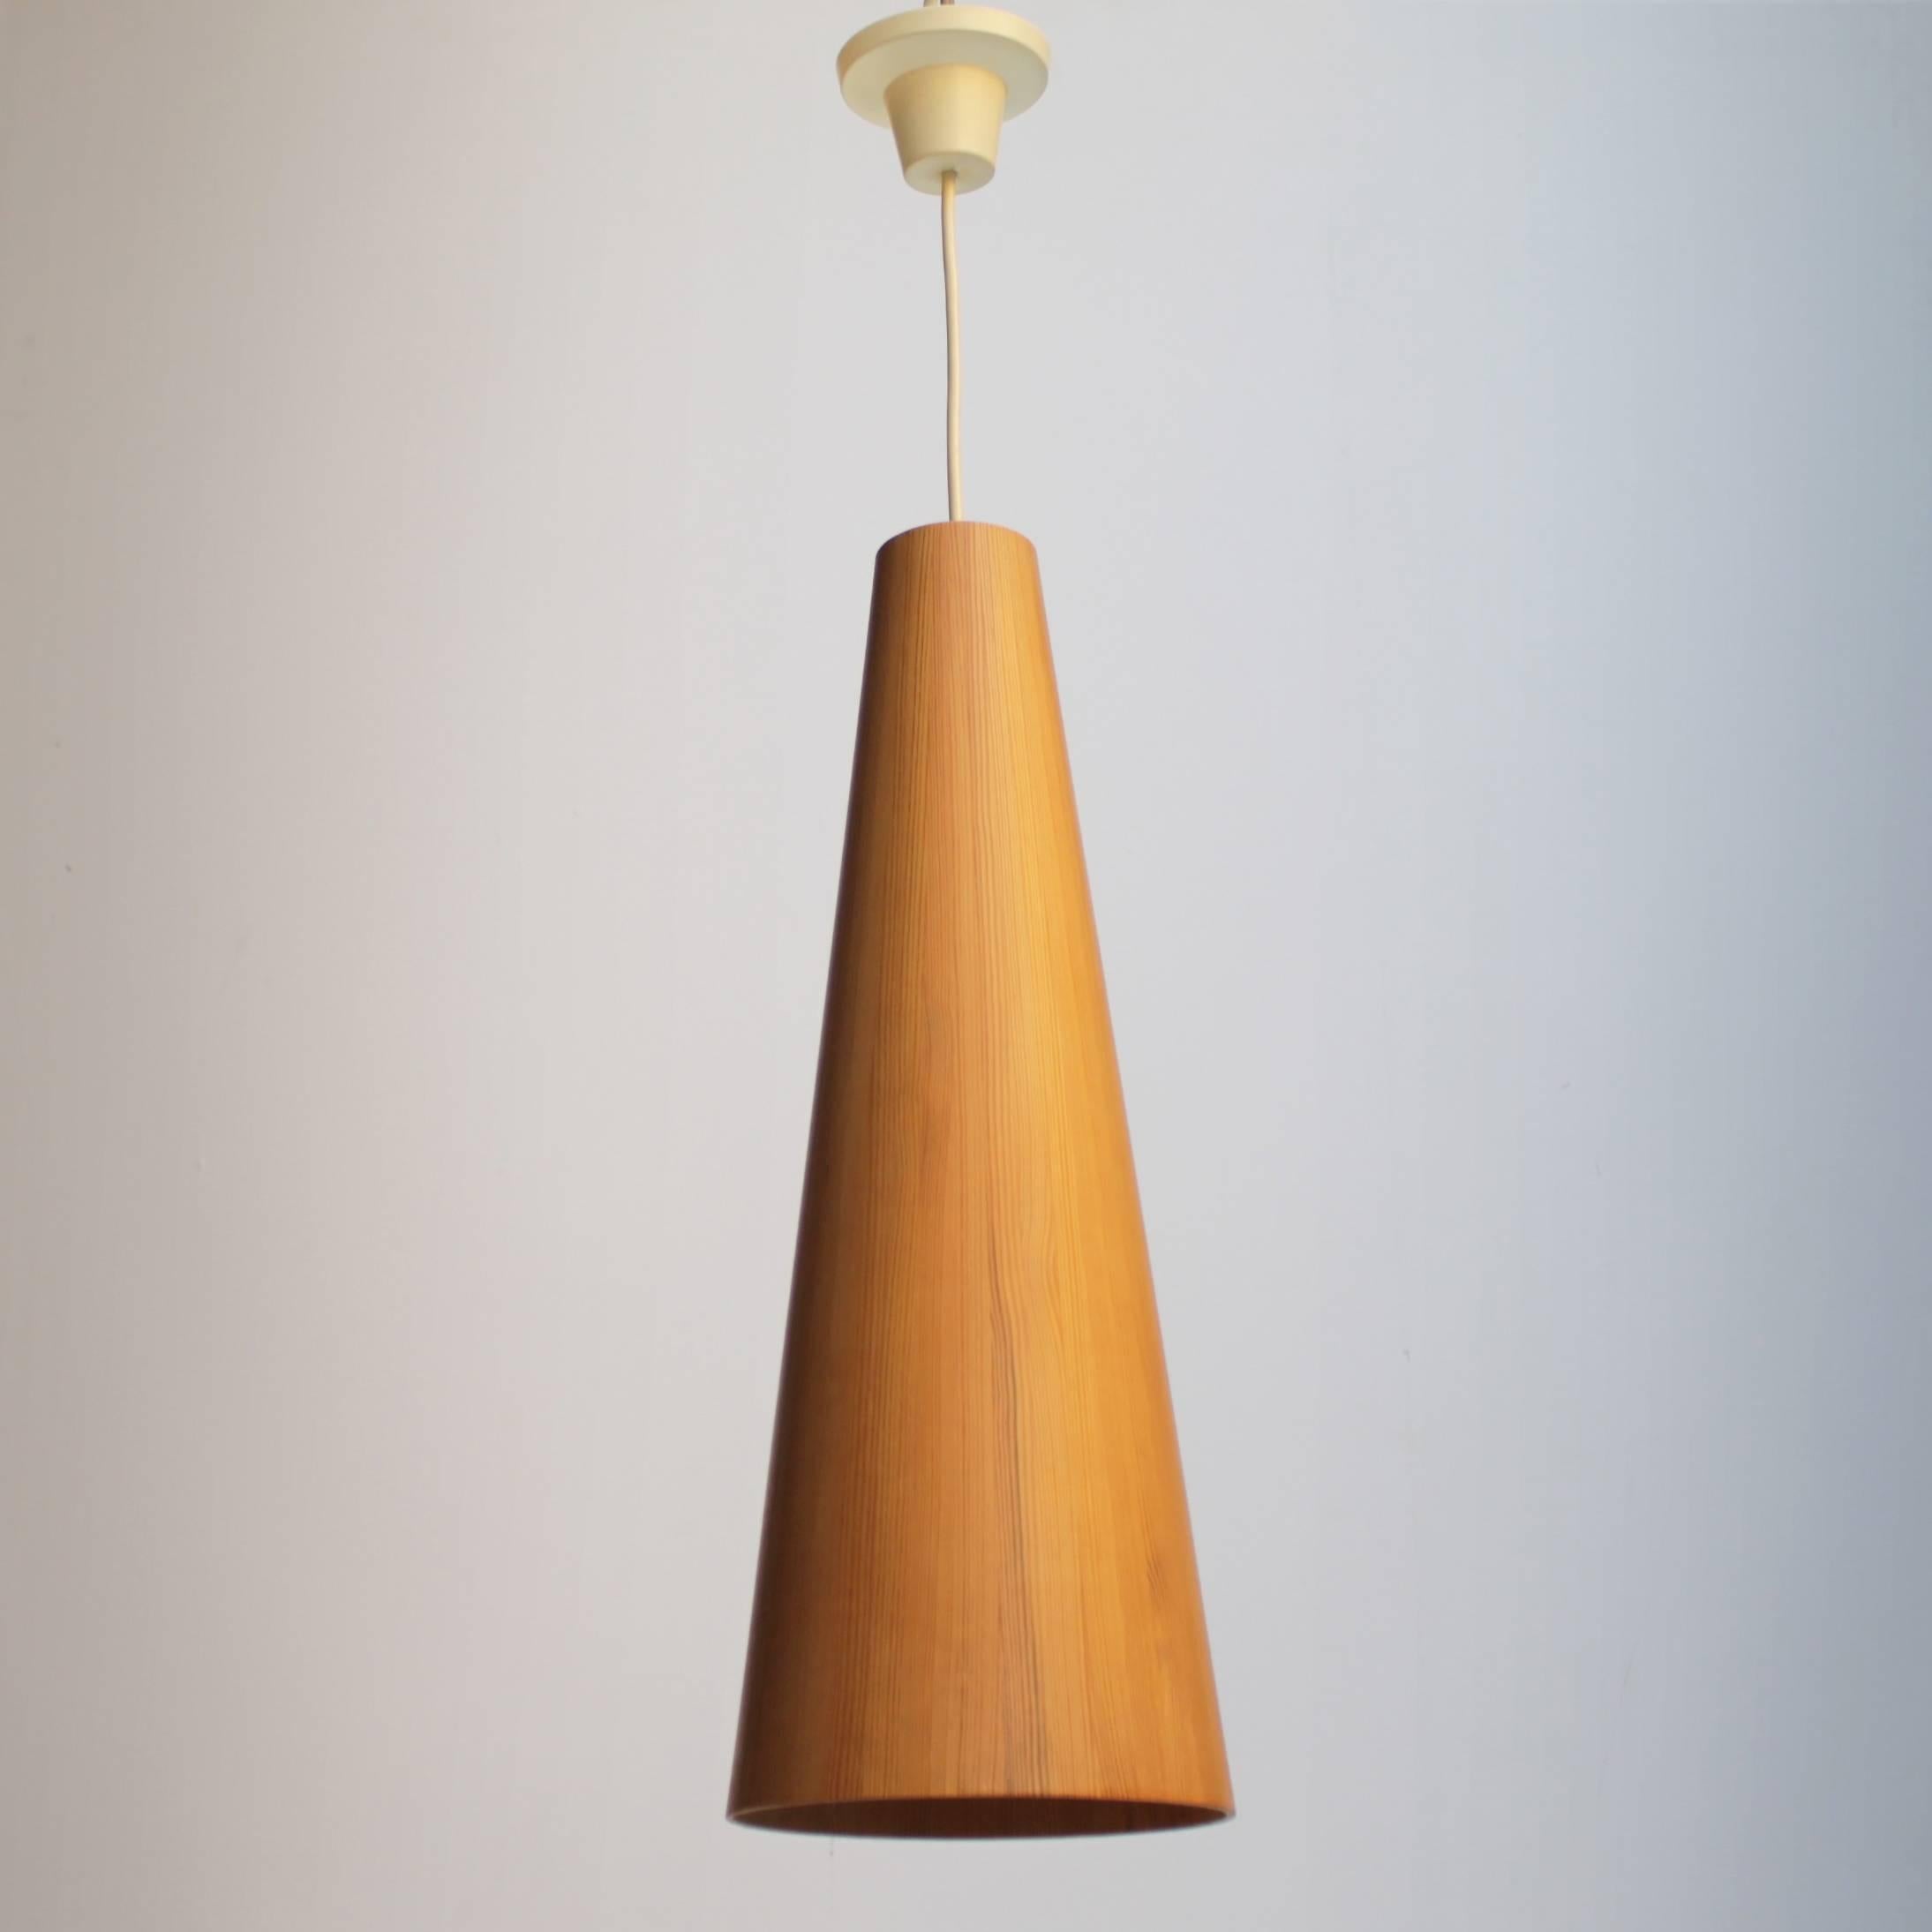 Conus pendant by Jorgen Wolff for Torben Orskov, Denmark.
Dimensions: height 23.6 in. (60 cm), diameter 8.7 inches (22 cm). Materials: Oregon pine; metal and plastic (suspension system). Fully original suspension system. Small spot of discoloration